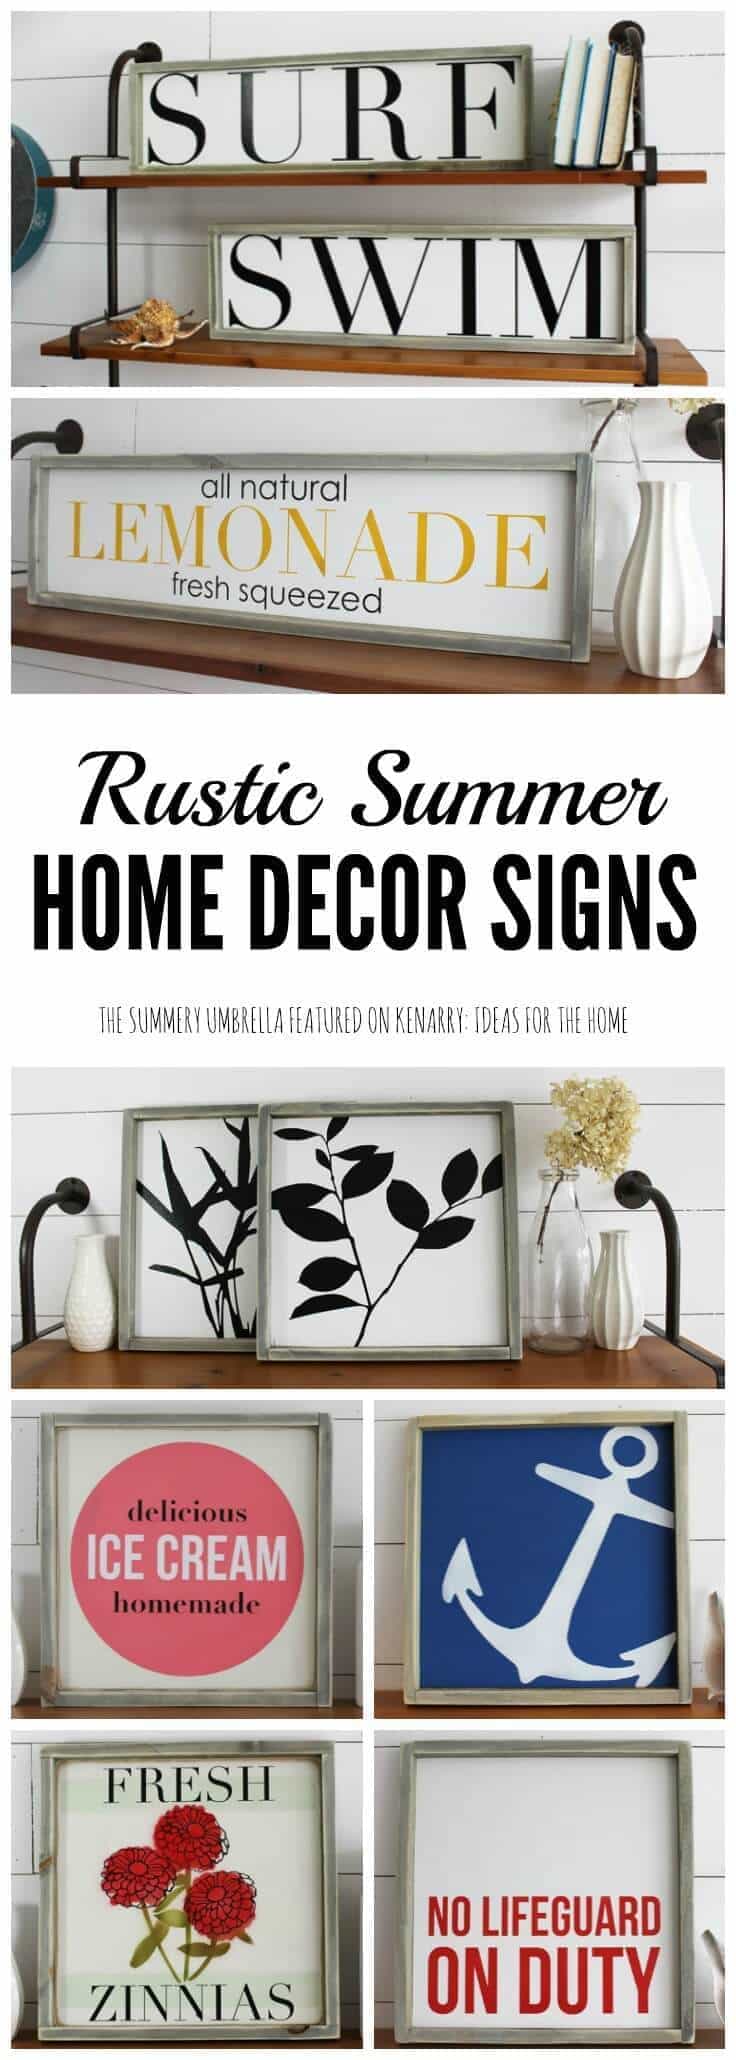 Beautiful rustic summer home decor signs from The Summery Umbrella which offers rustic home decor with a twist of modern appeal.